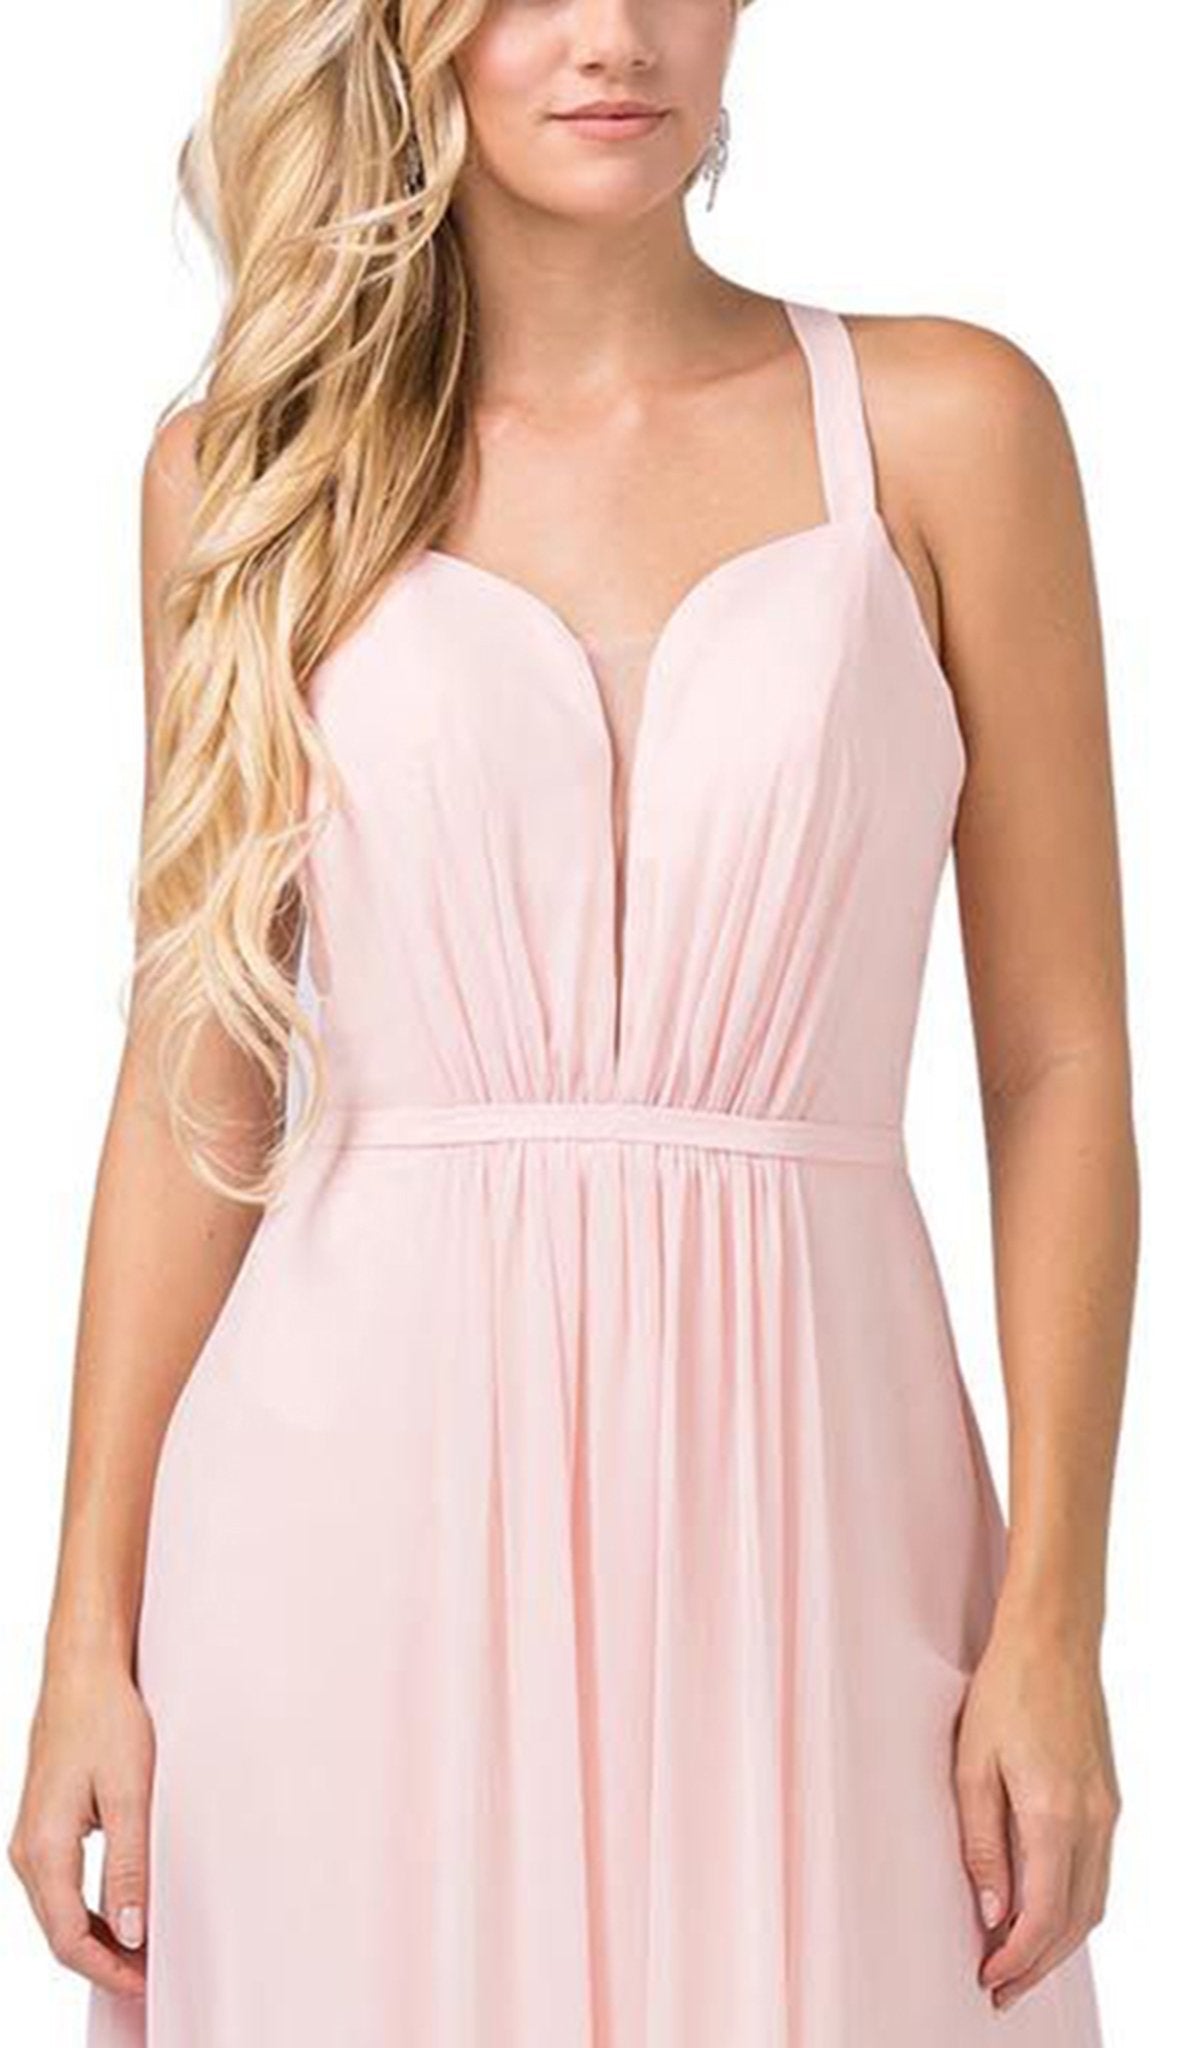 Dancing Queen - 2541 Crisscross Strap Ruched Bodice Chiffon Dress In Pink